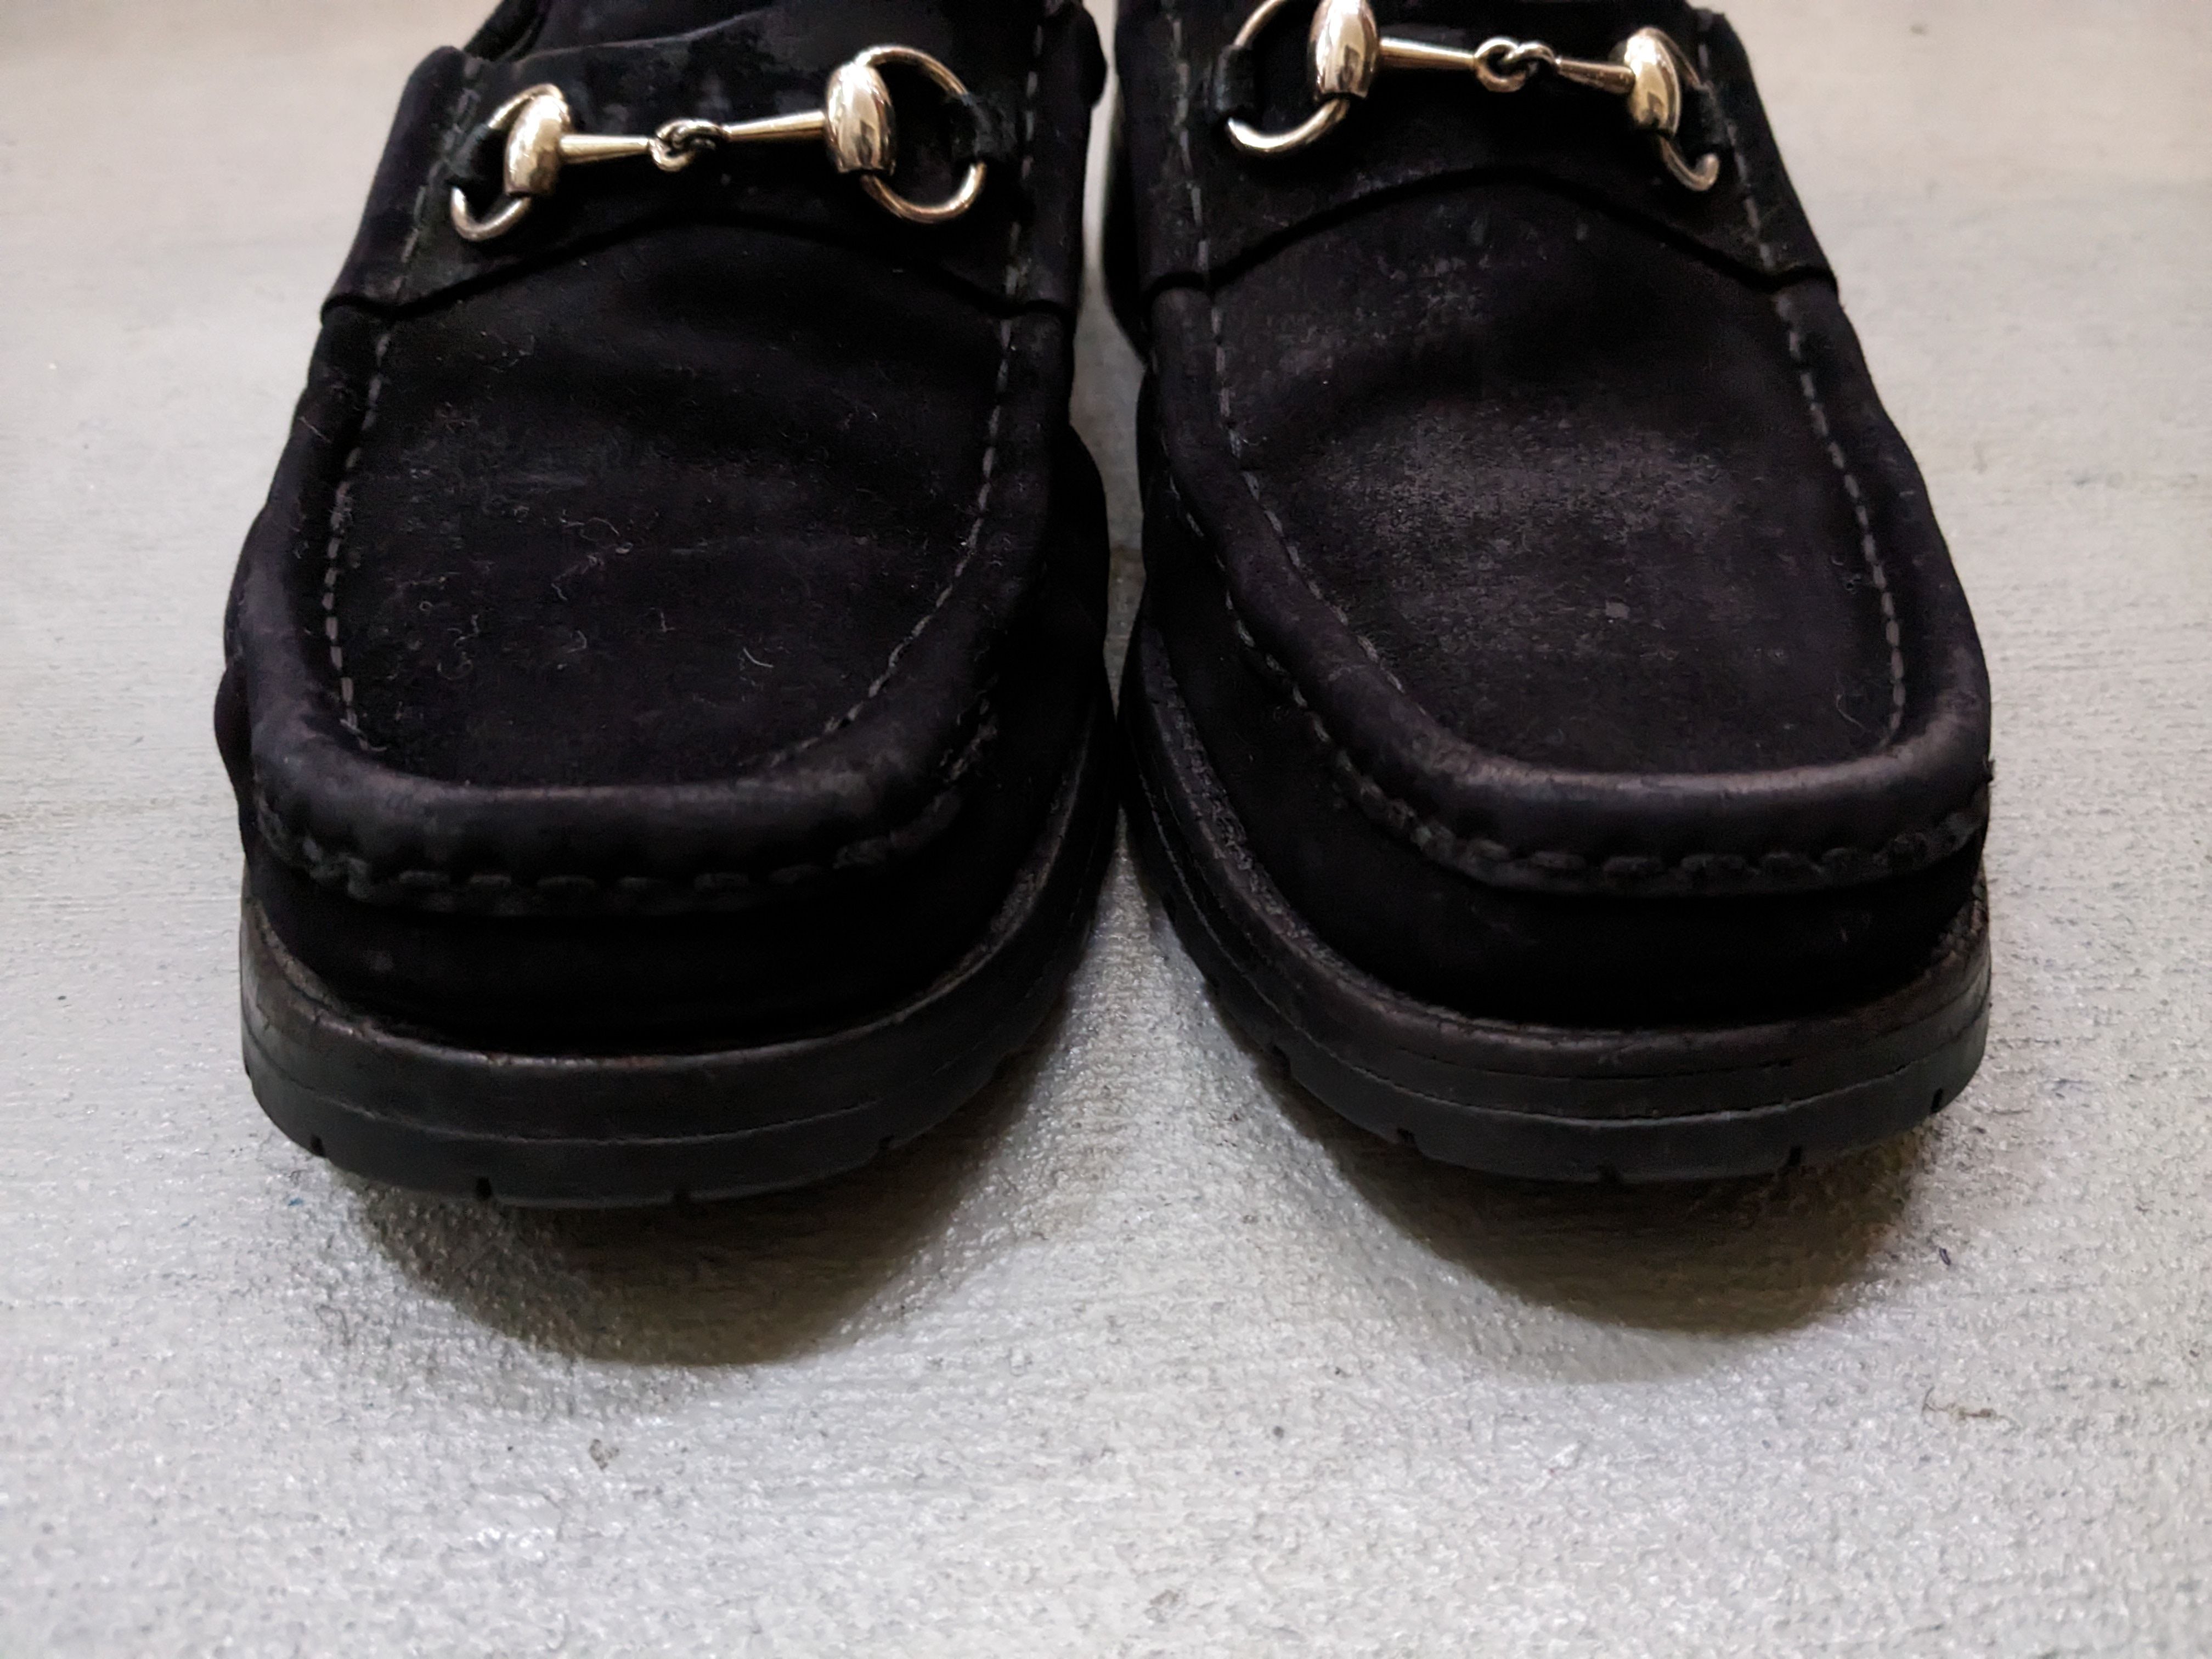 Gucci Gucci Horsebit Loafers Black Leather Size 9.5 Italy Slip On Size US 9.5 / EU 42-43 - 2 Preview